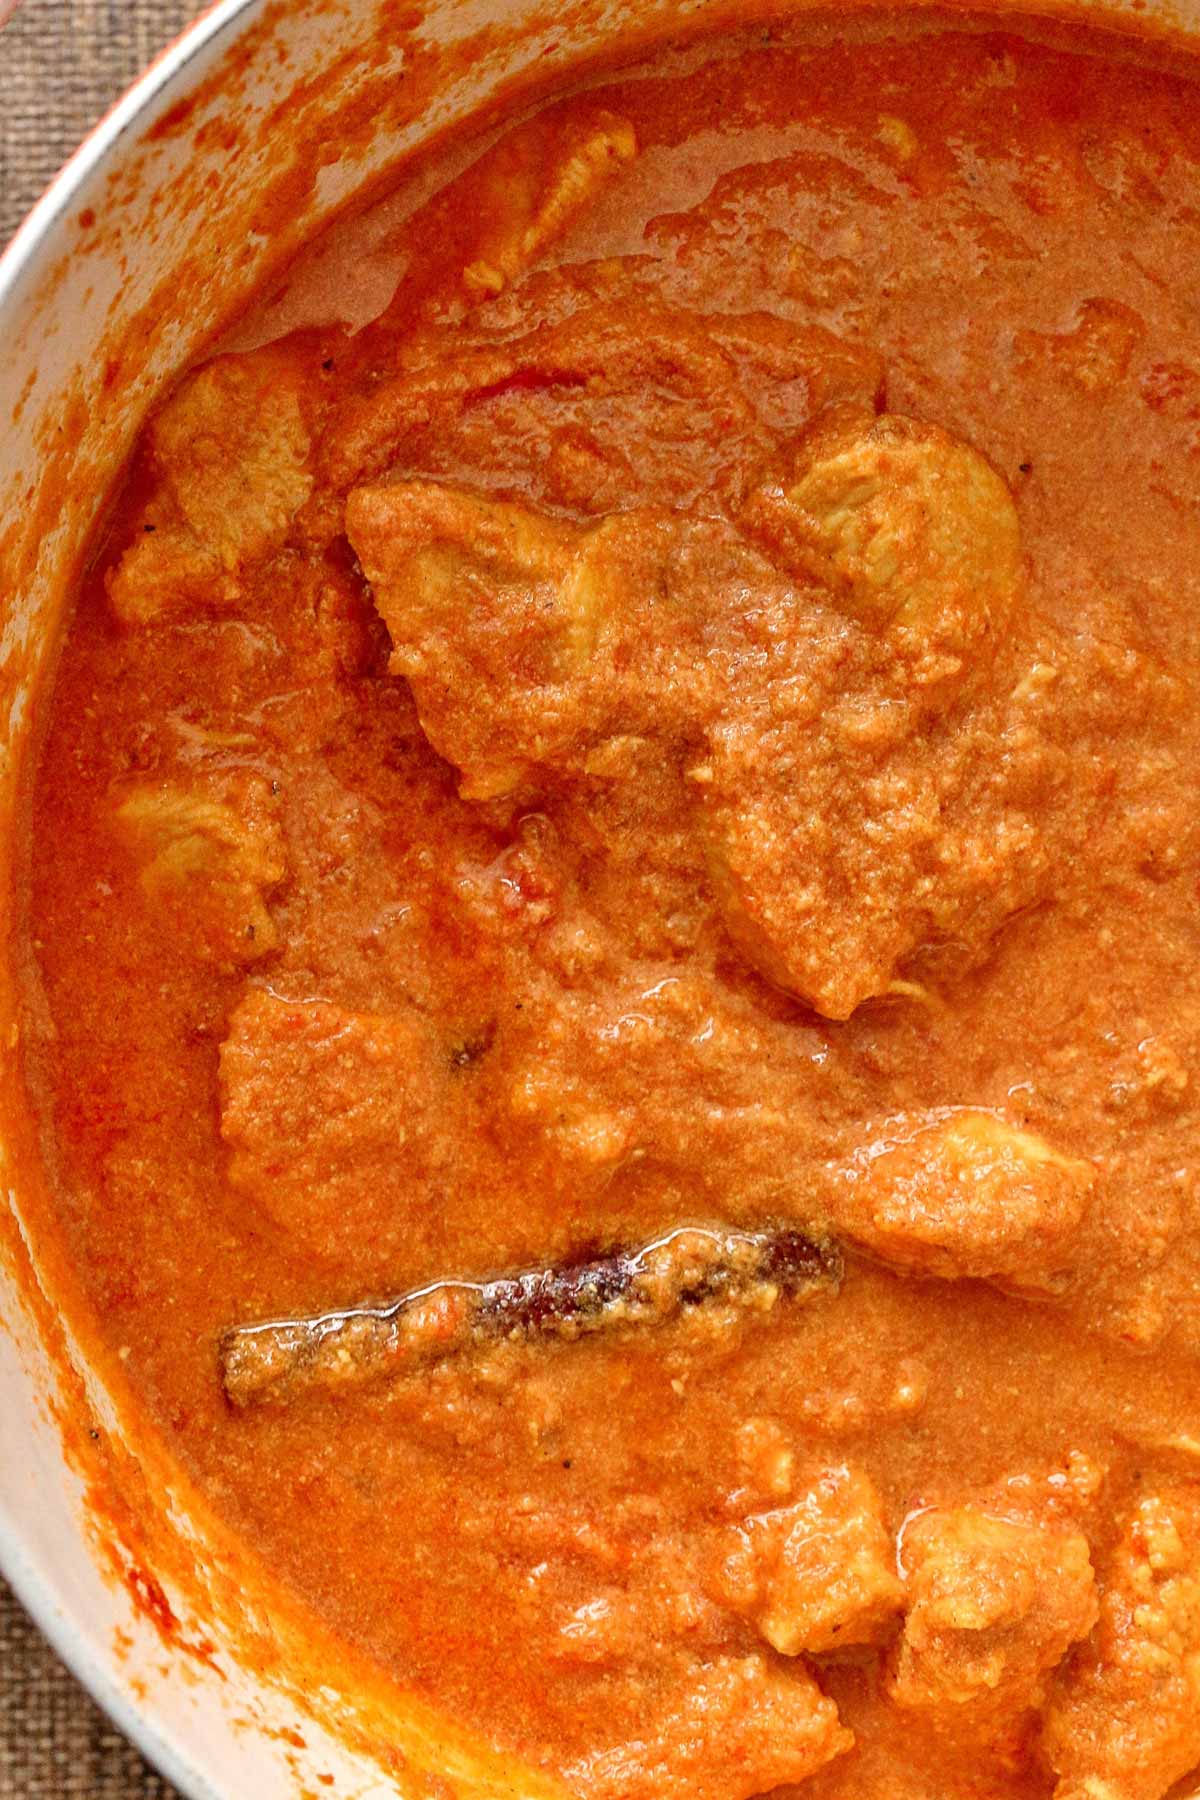 A pot of creamy Indian chicken curry with a visible cinnamon stick.